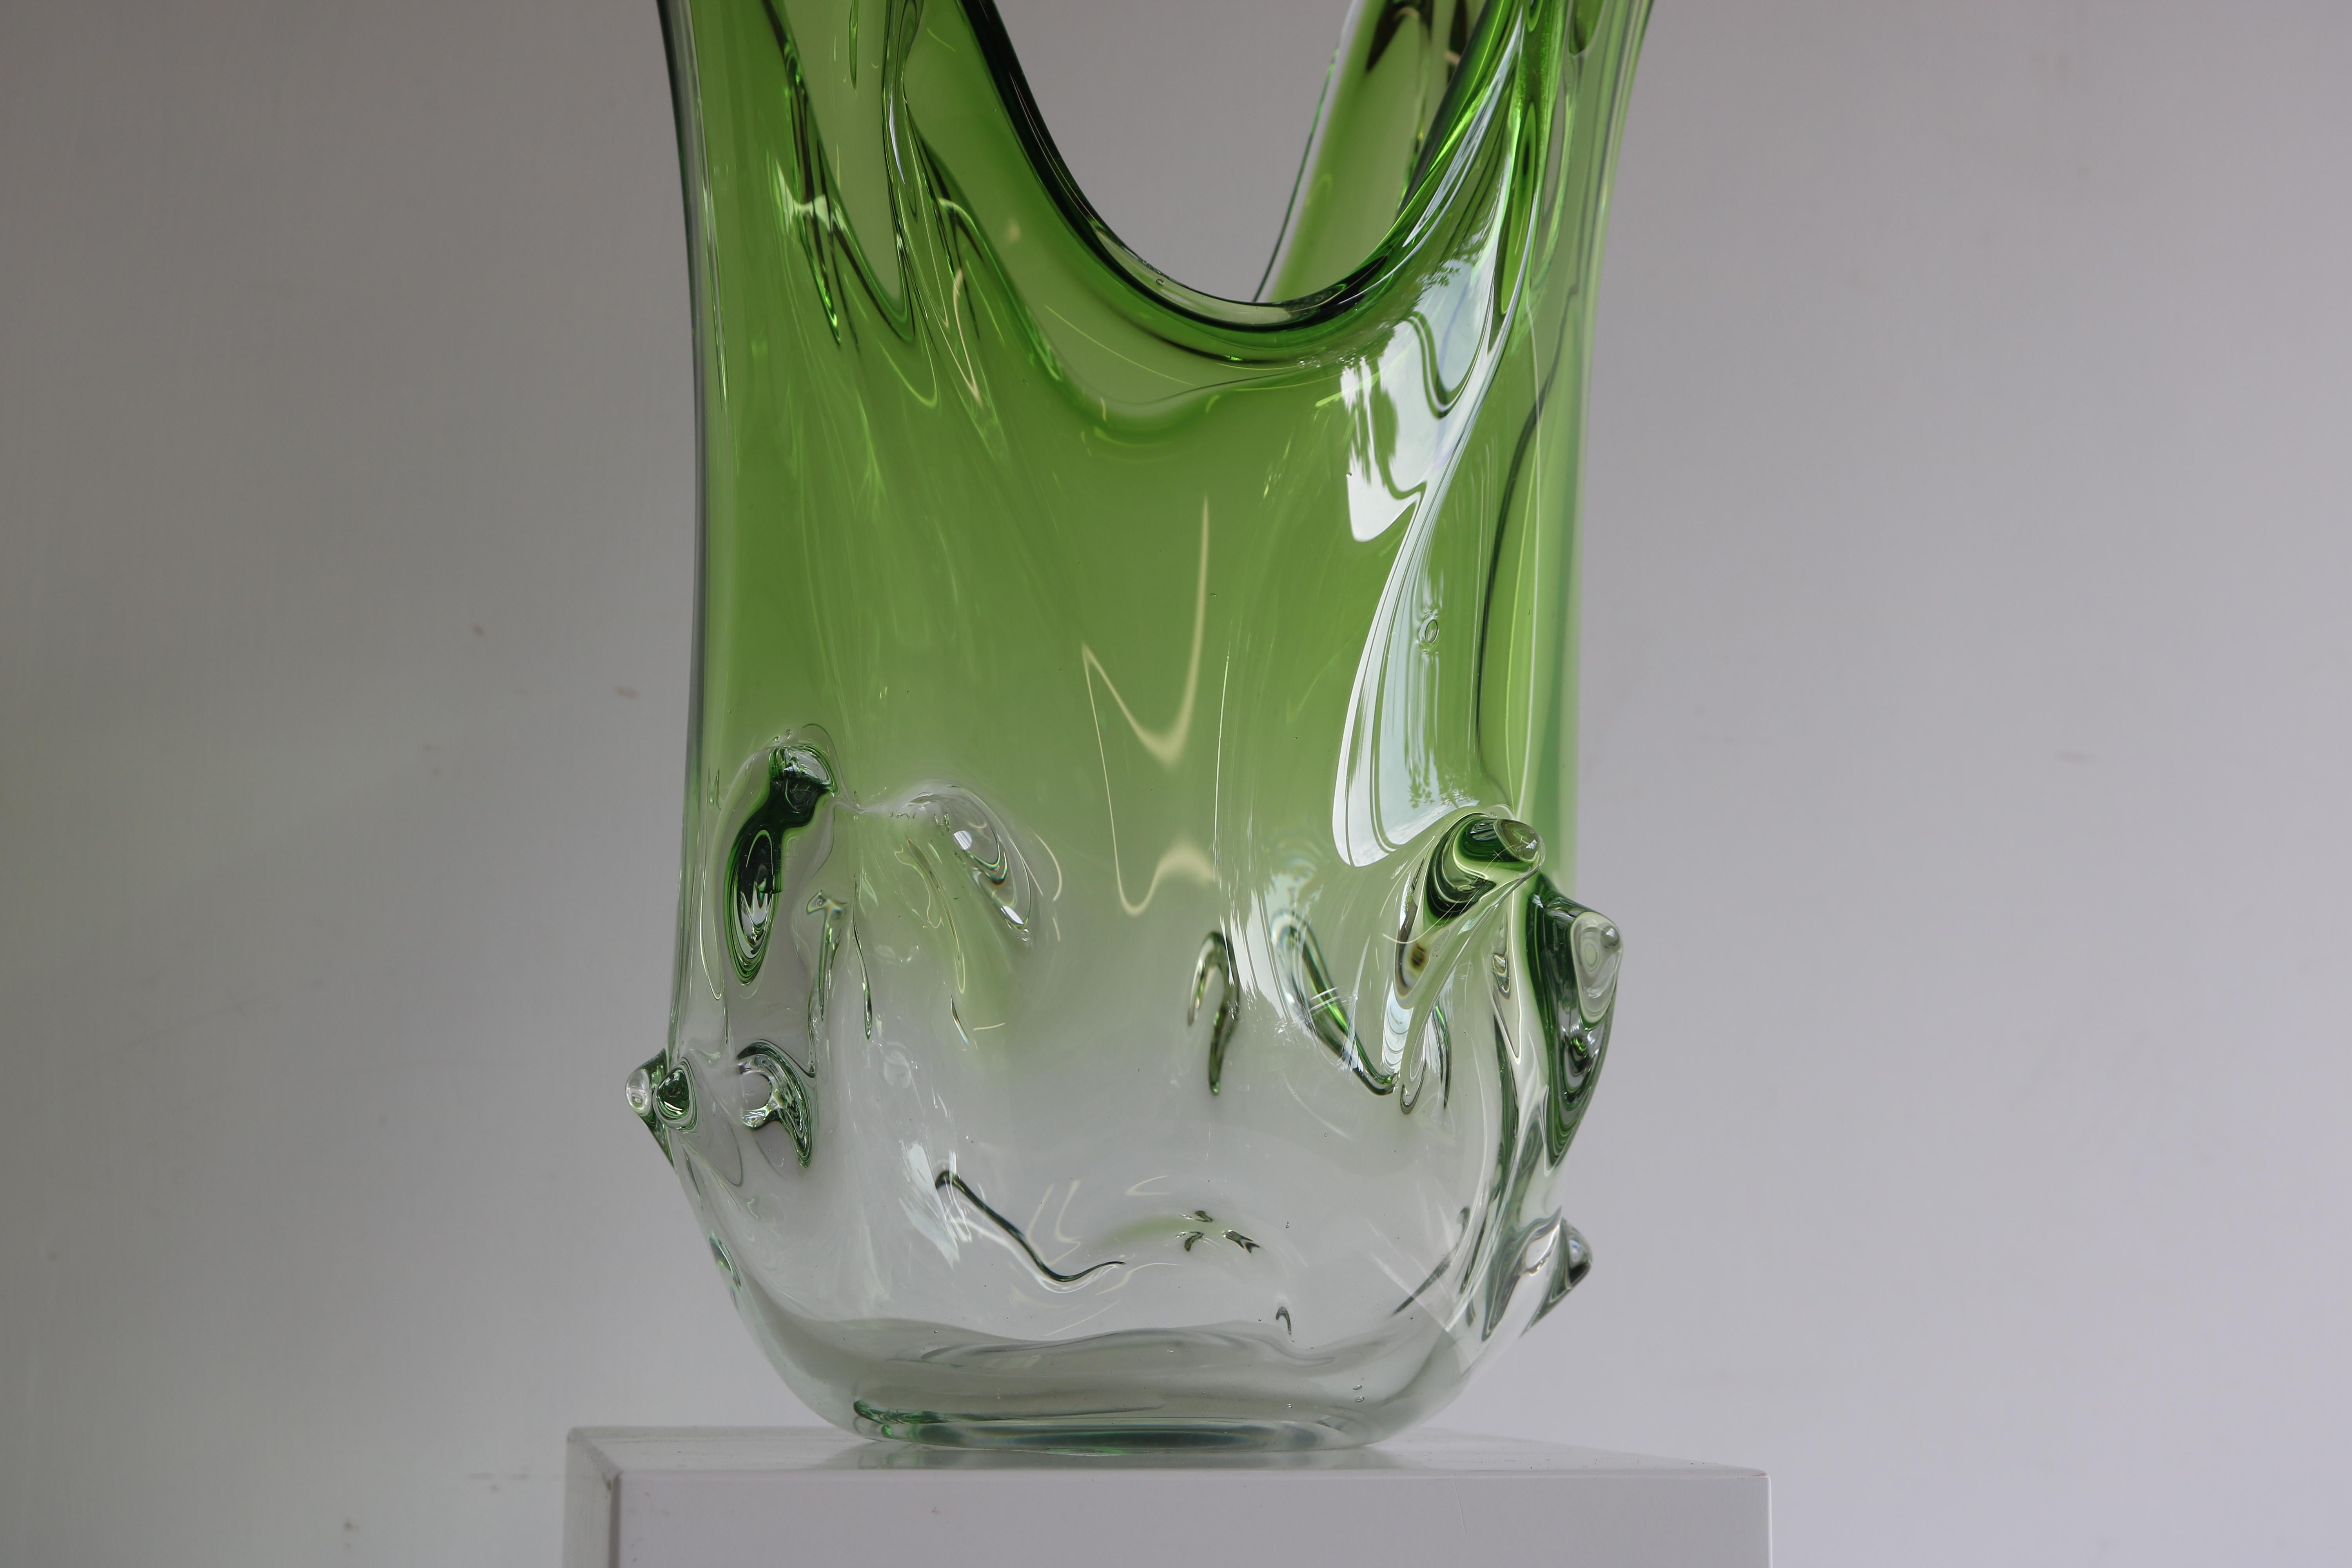 Add a touch of elegance to your home décor with this magnificent Murano glass vase. Exceptional large model of 20 inch & weighing an impressive 5.4kg! Crafted using the sommerso technique, this vase features a beautiful green and clear glass color